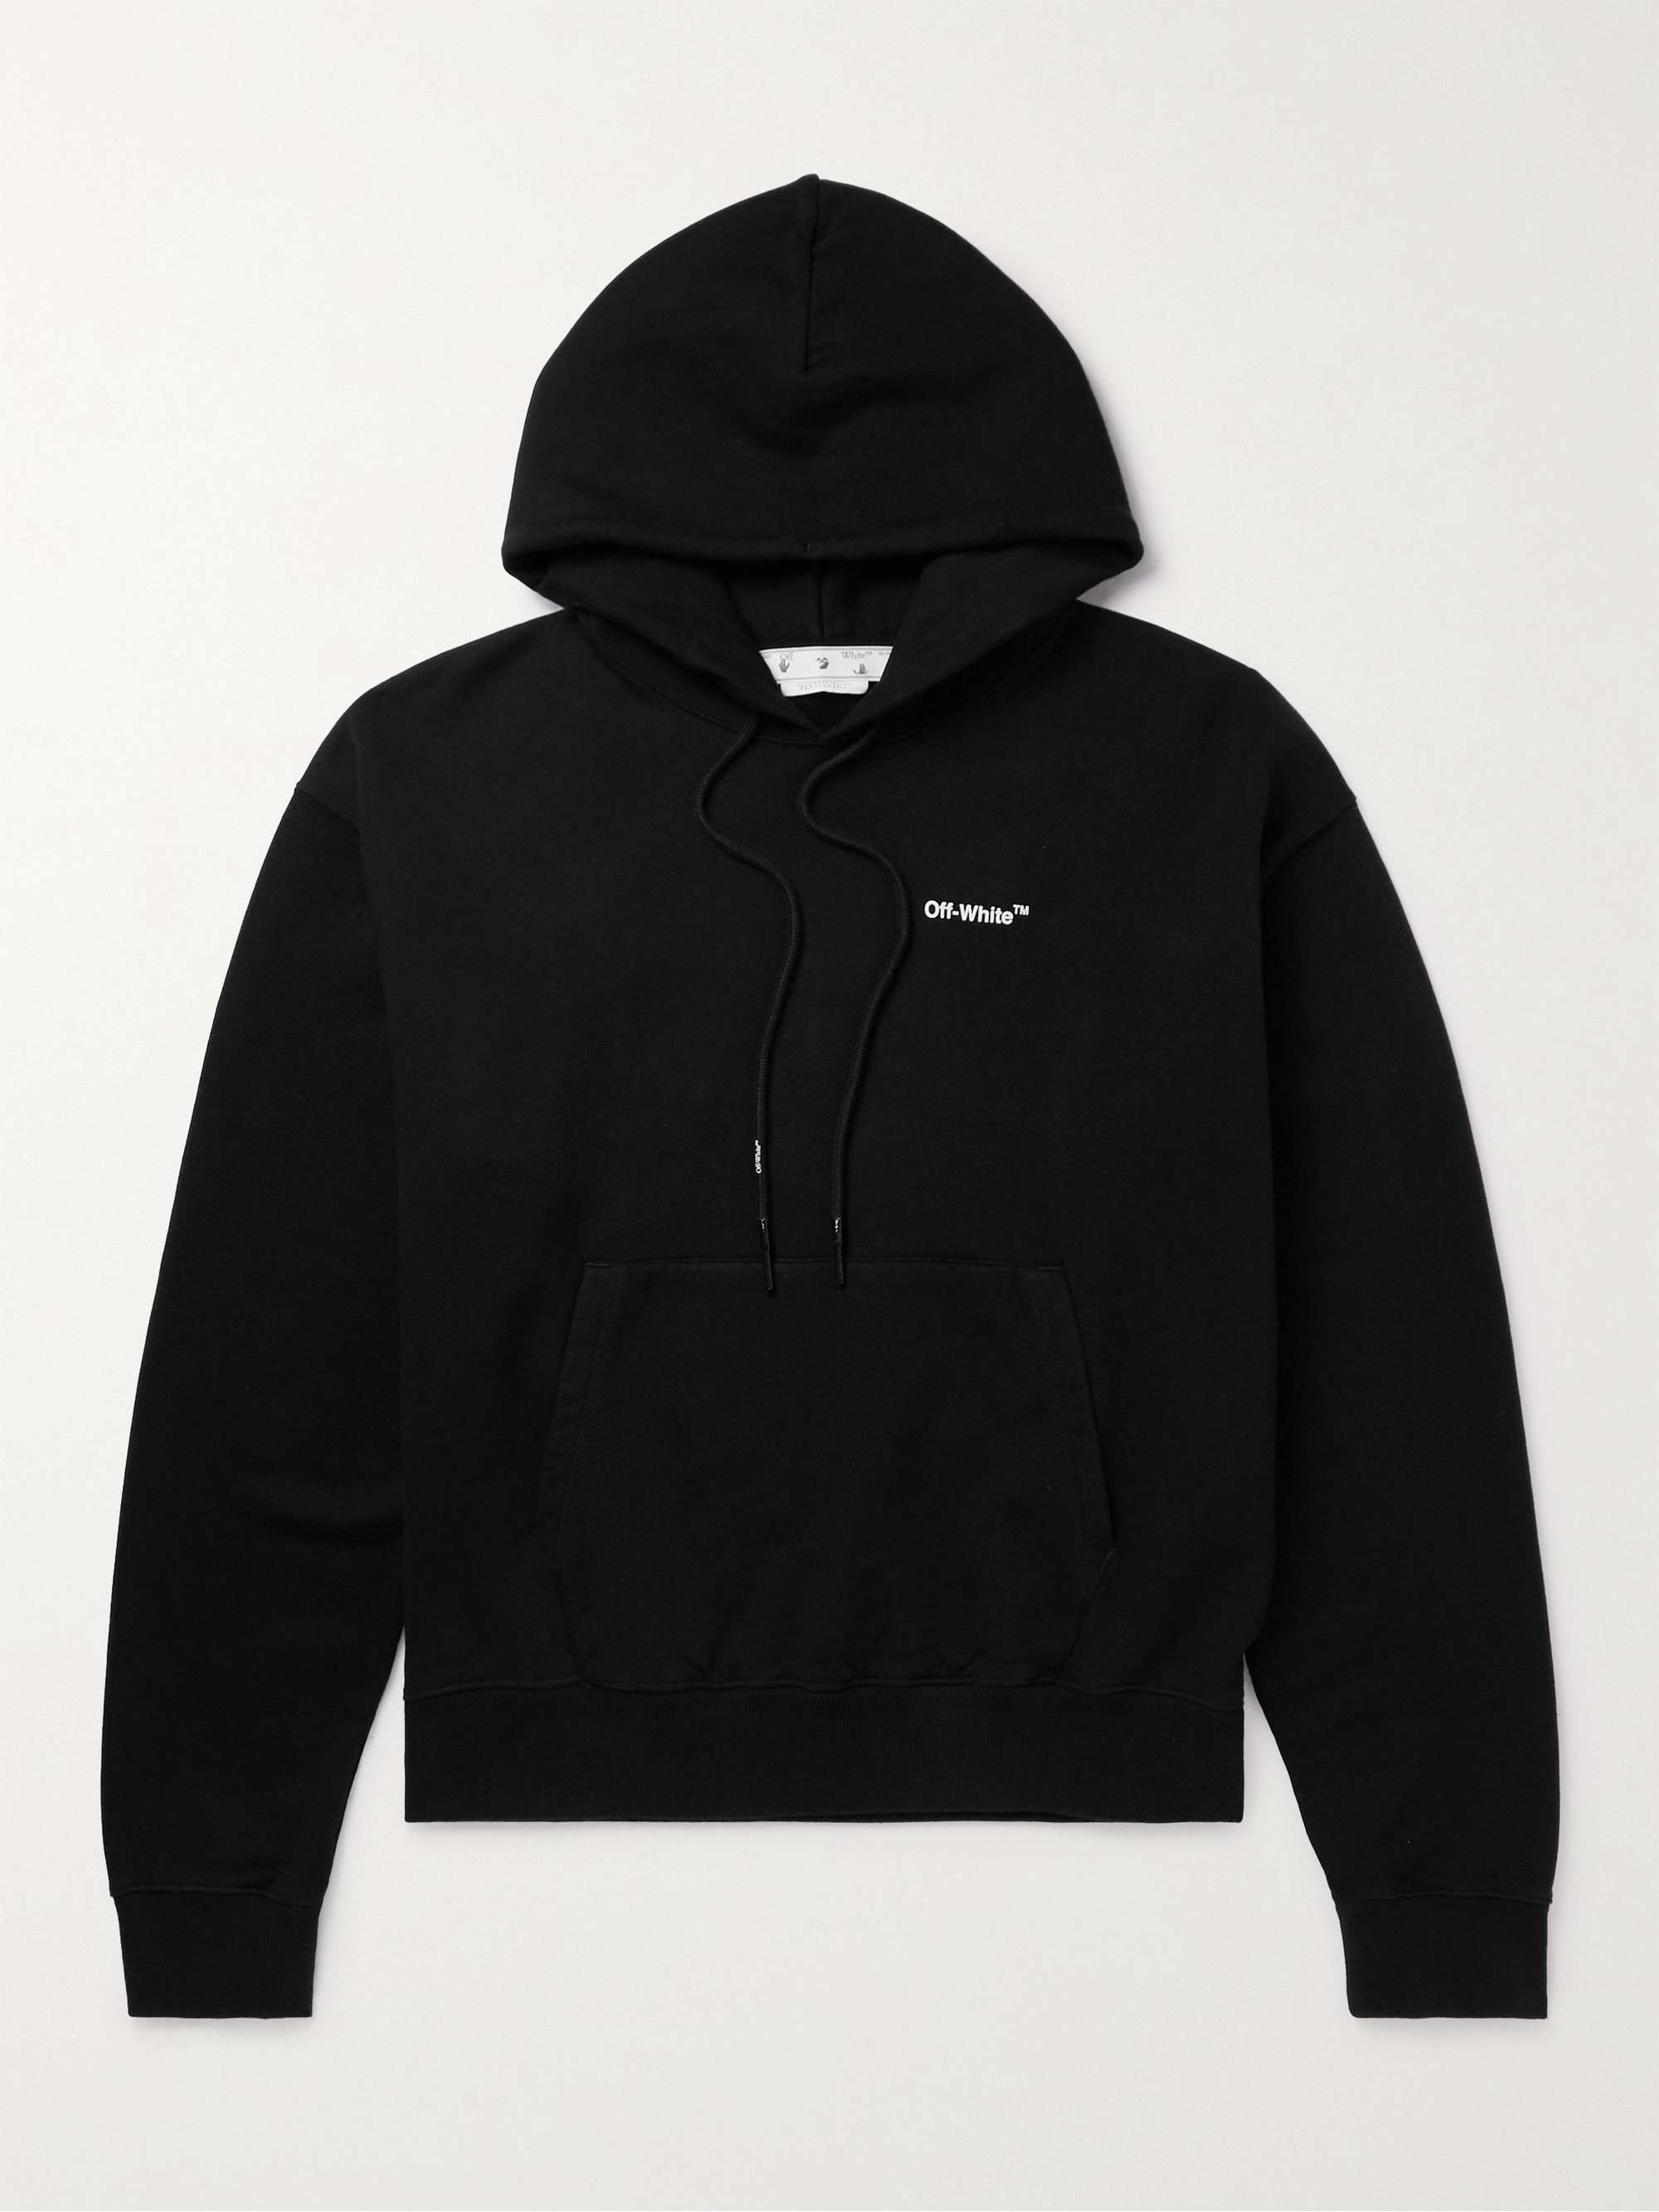 OFF-WHITE Printed Cotton-Jersey Hoodie,Black